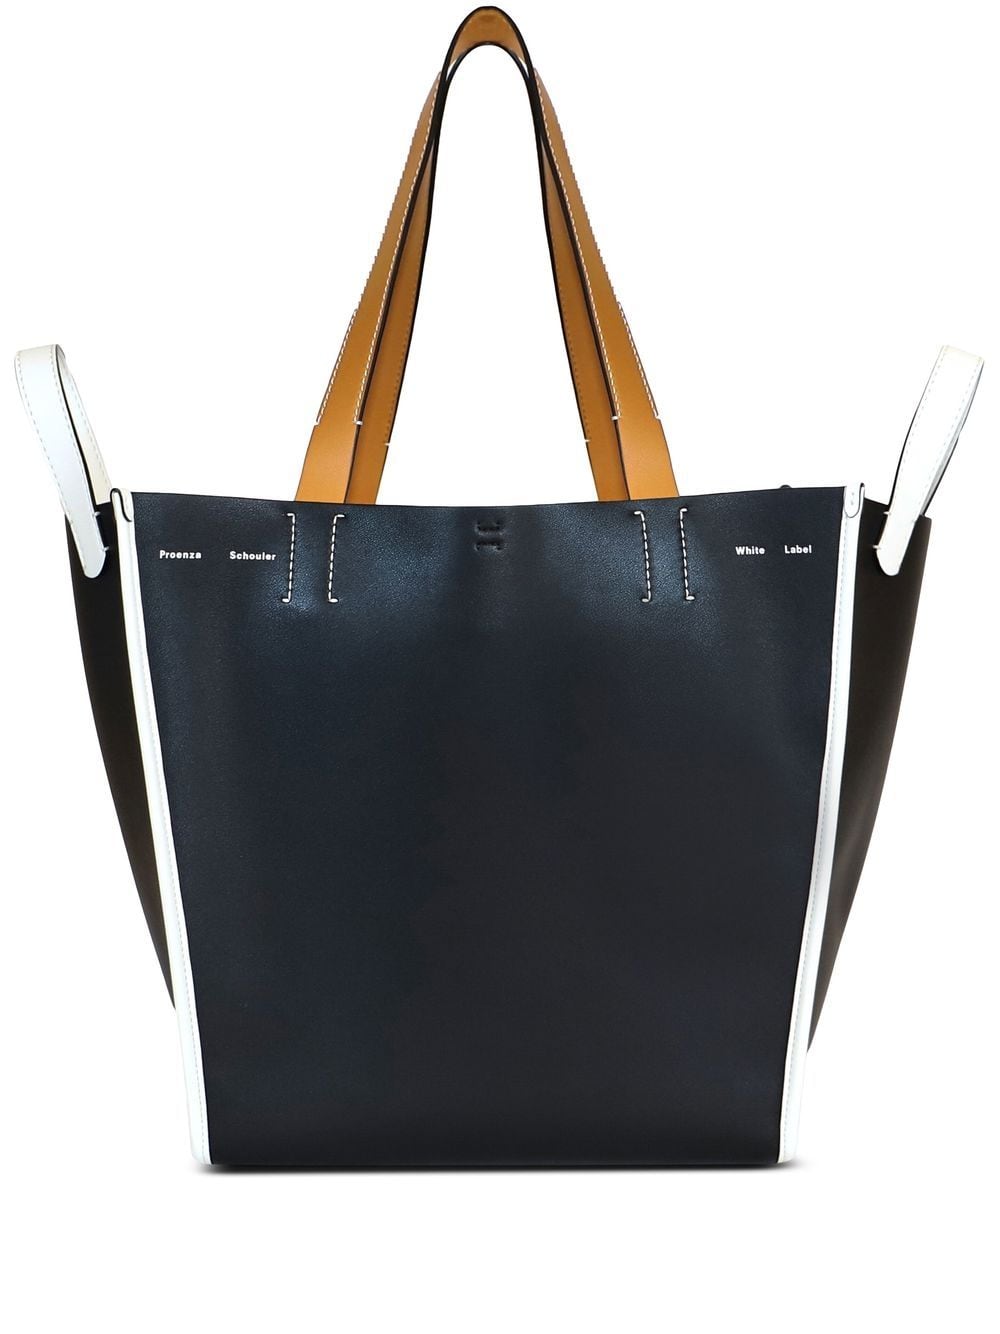 Image 1 of Proenza Schouler White Label XL Mercer leather tote bag